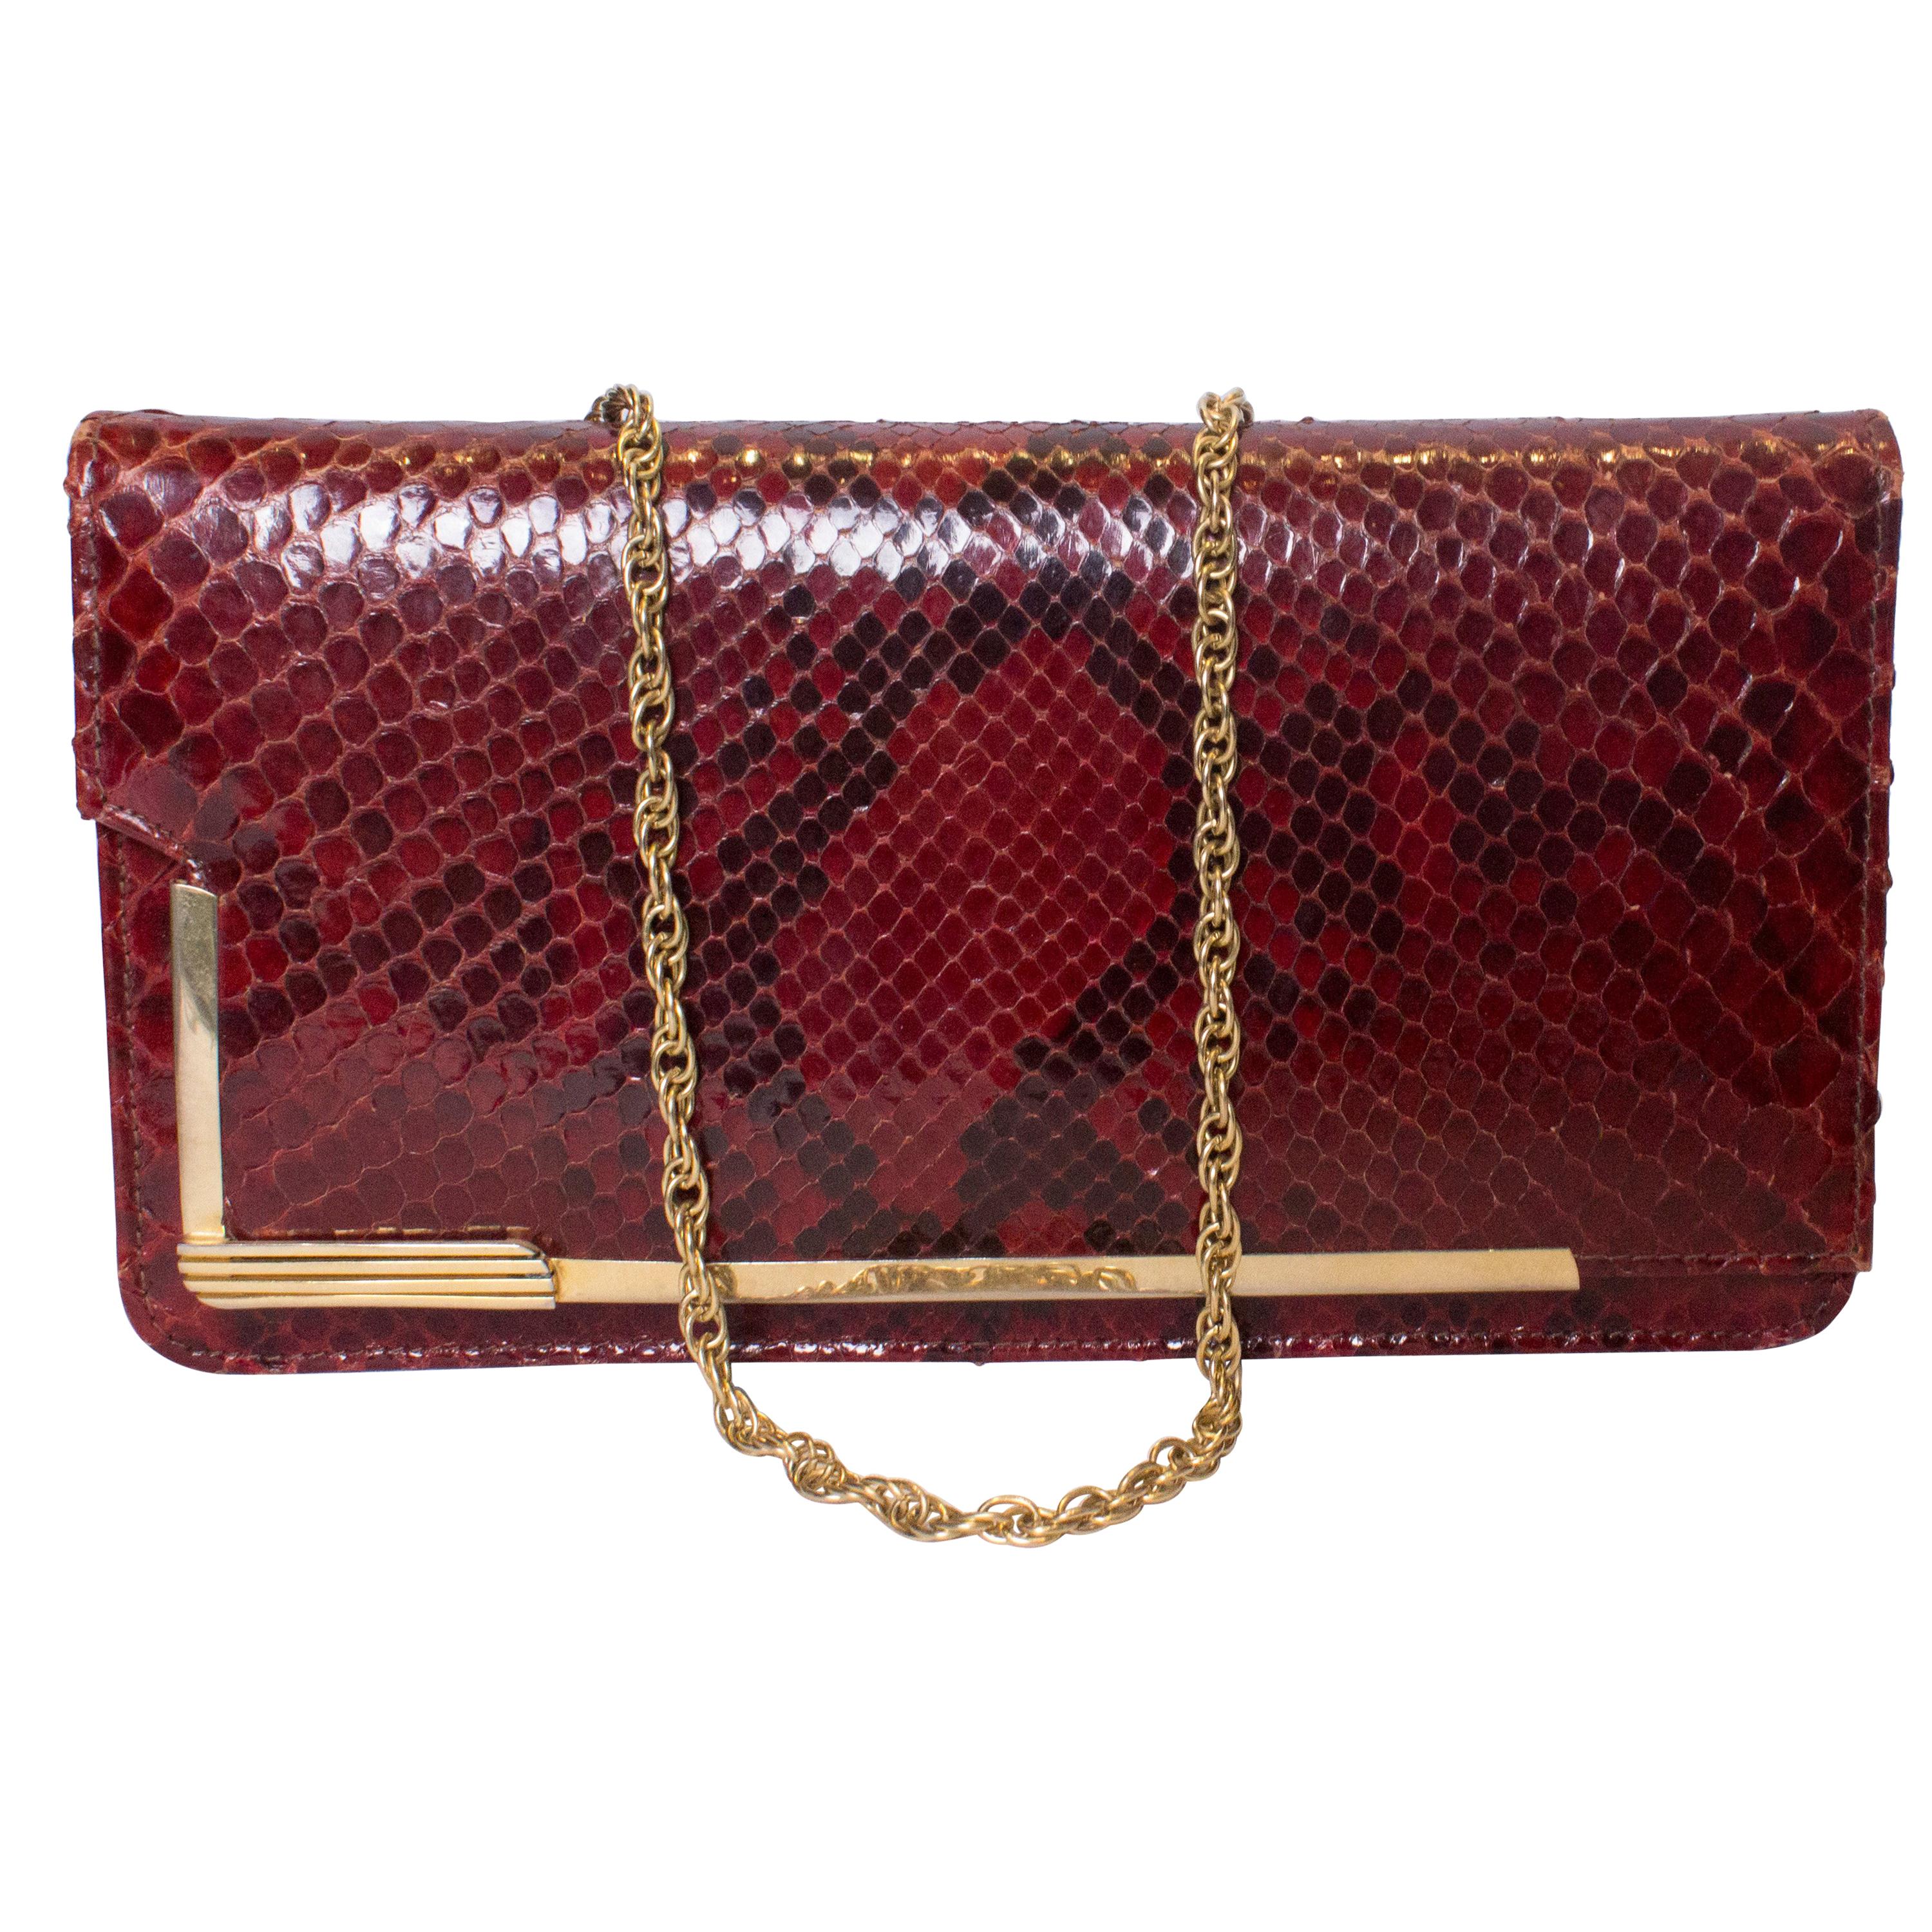 Vintage Red Snakeskin Handbag with chain handle For Sale